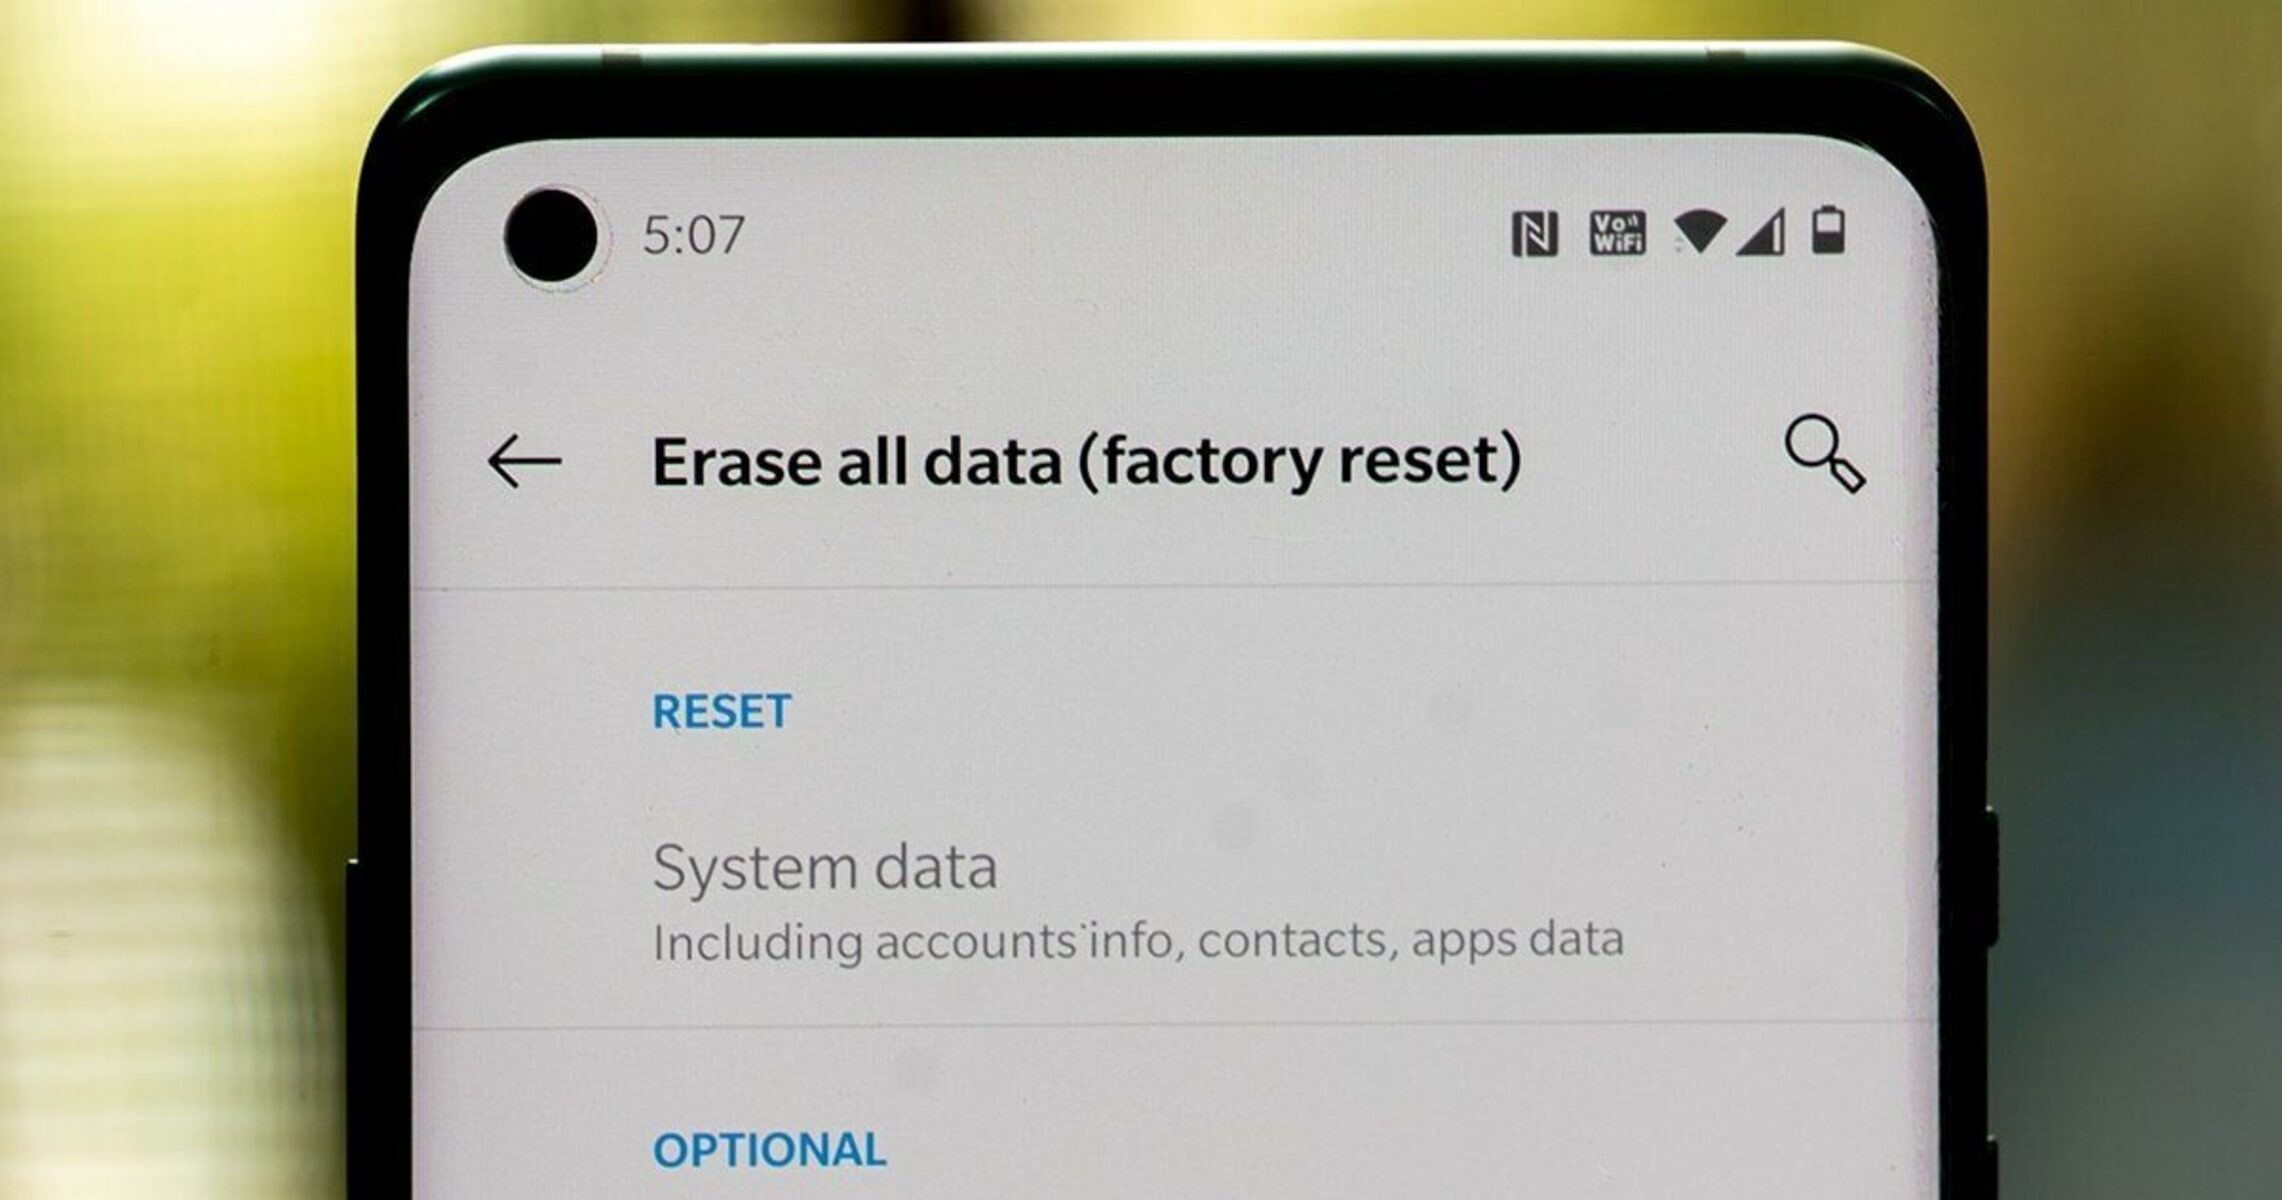 restoring-to-defaults-step-by-step-factory-reset-on-oneplus-8-pro